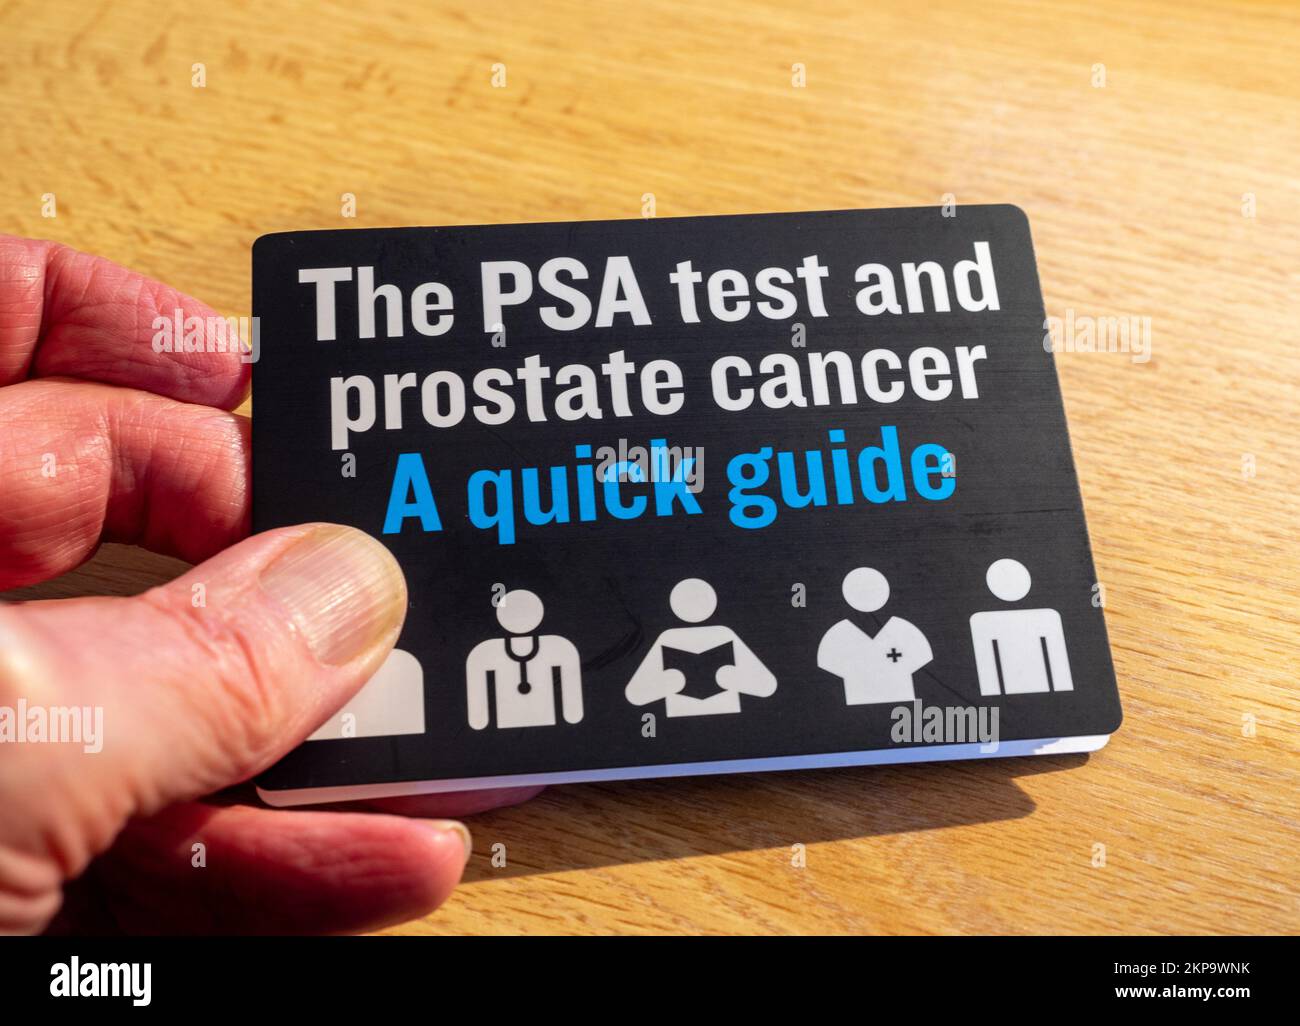 Man's hand holding a PSA test and prostate cancer guide, UK Stock Photo